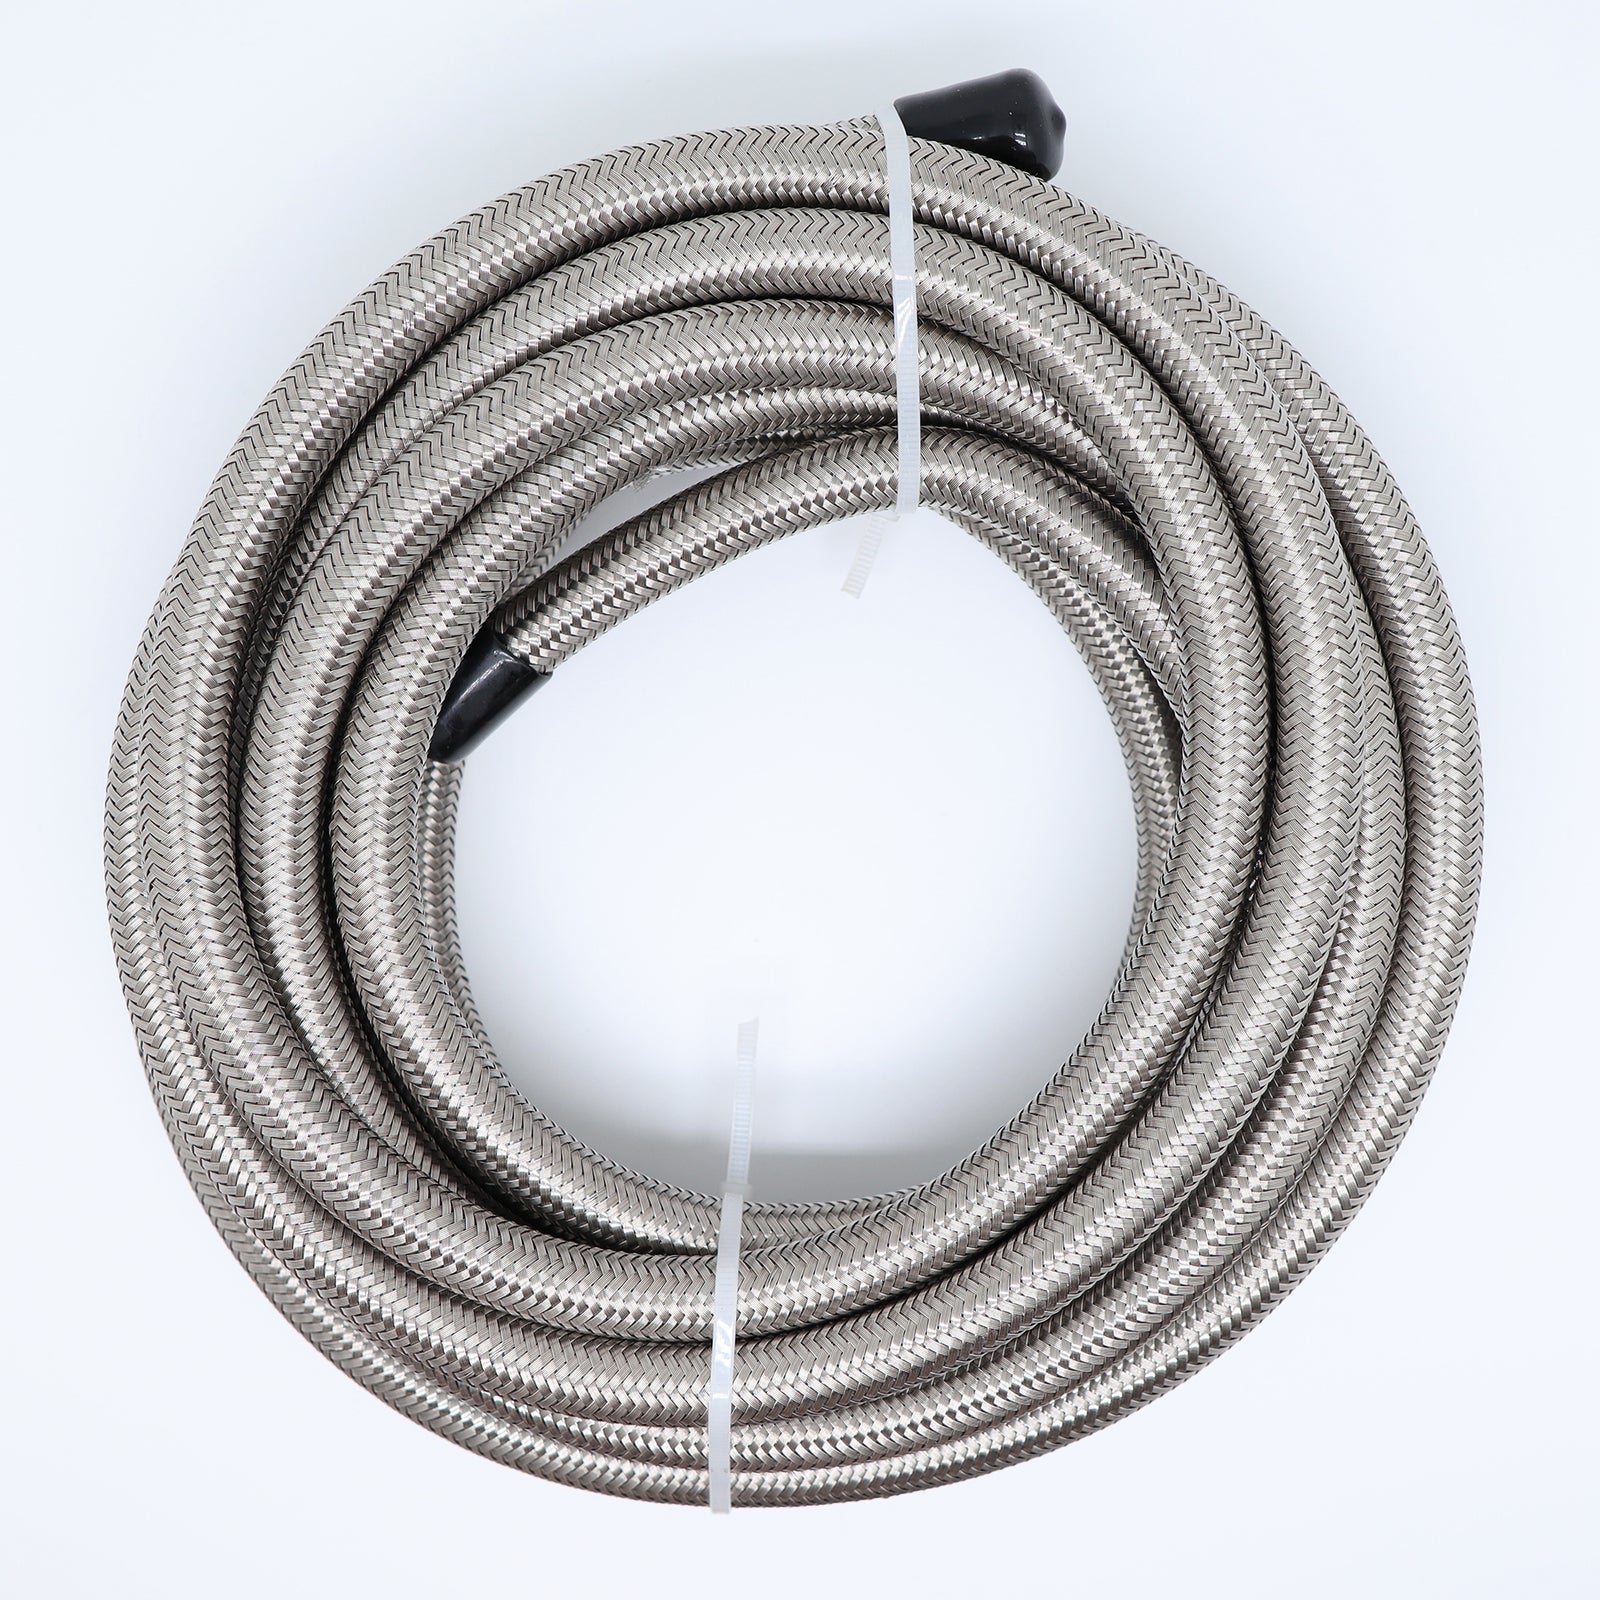 1/8 Stainless Steel Braided Hose (AN-3) Fuel/Oil/Water E85 20ft - TT Racing